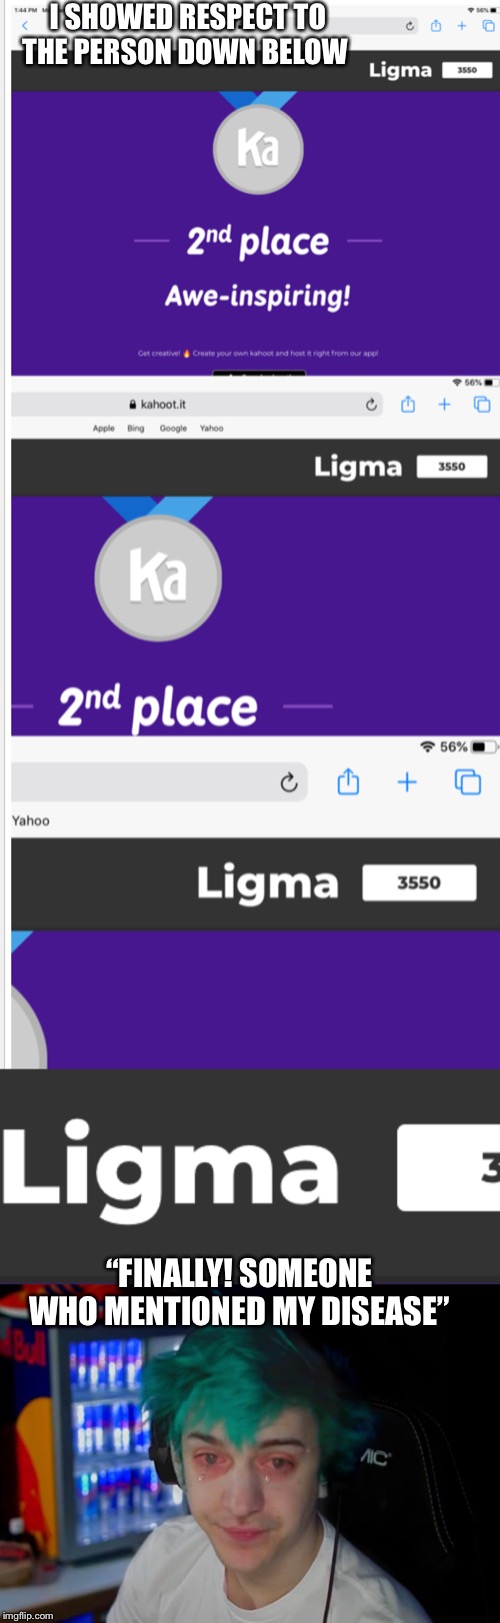 My name is Ligma 